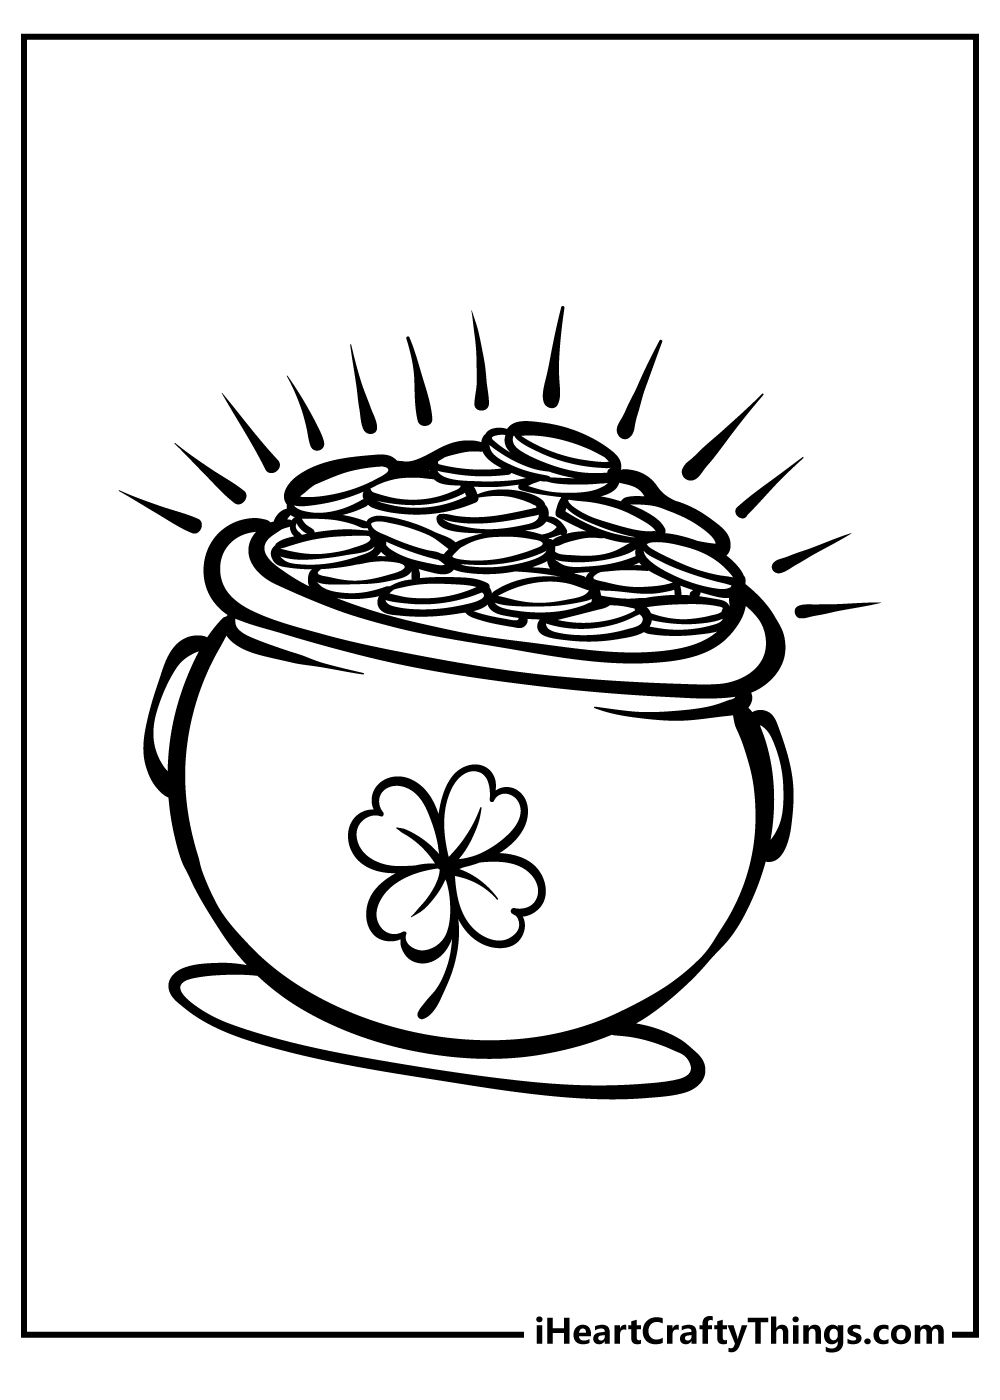 St Patrick’s Day coloring pages free printable